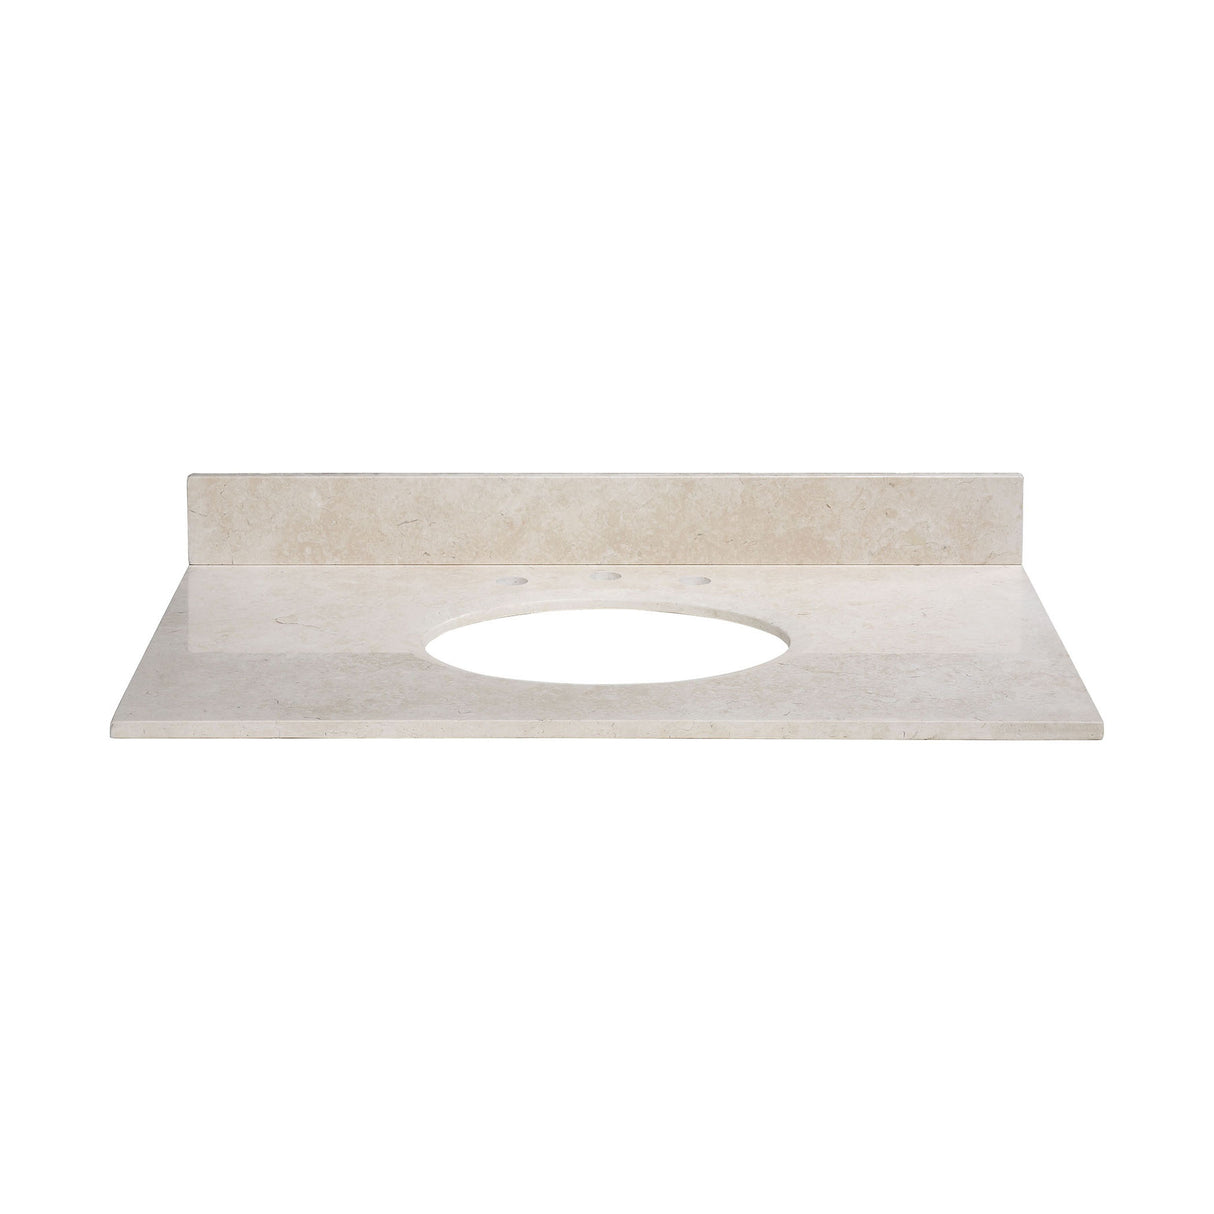 Elk MAUT310CM Stone Top - 31-inch for Oval Undermount Sink - Galala Beige Marble